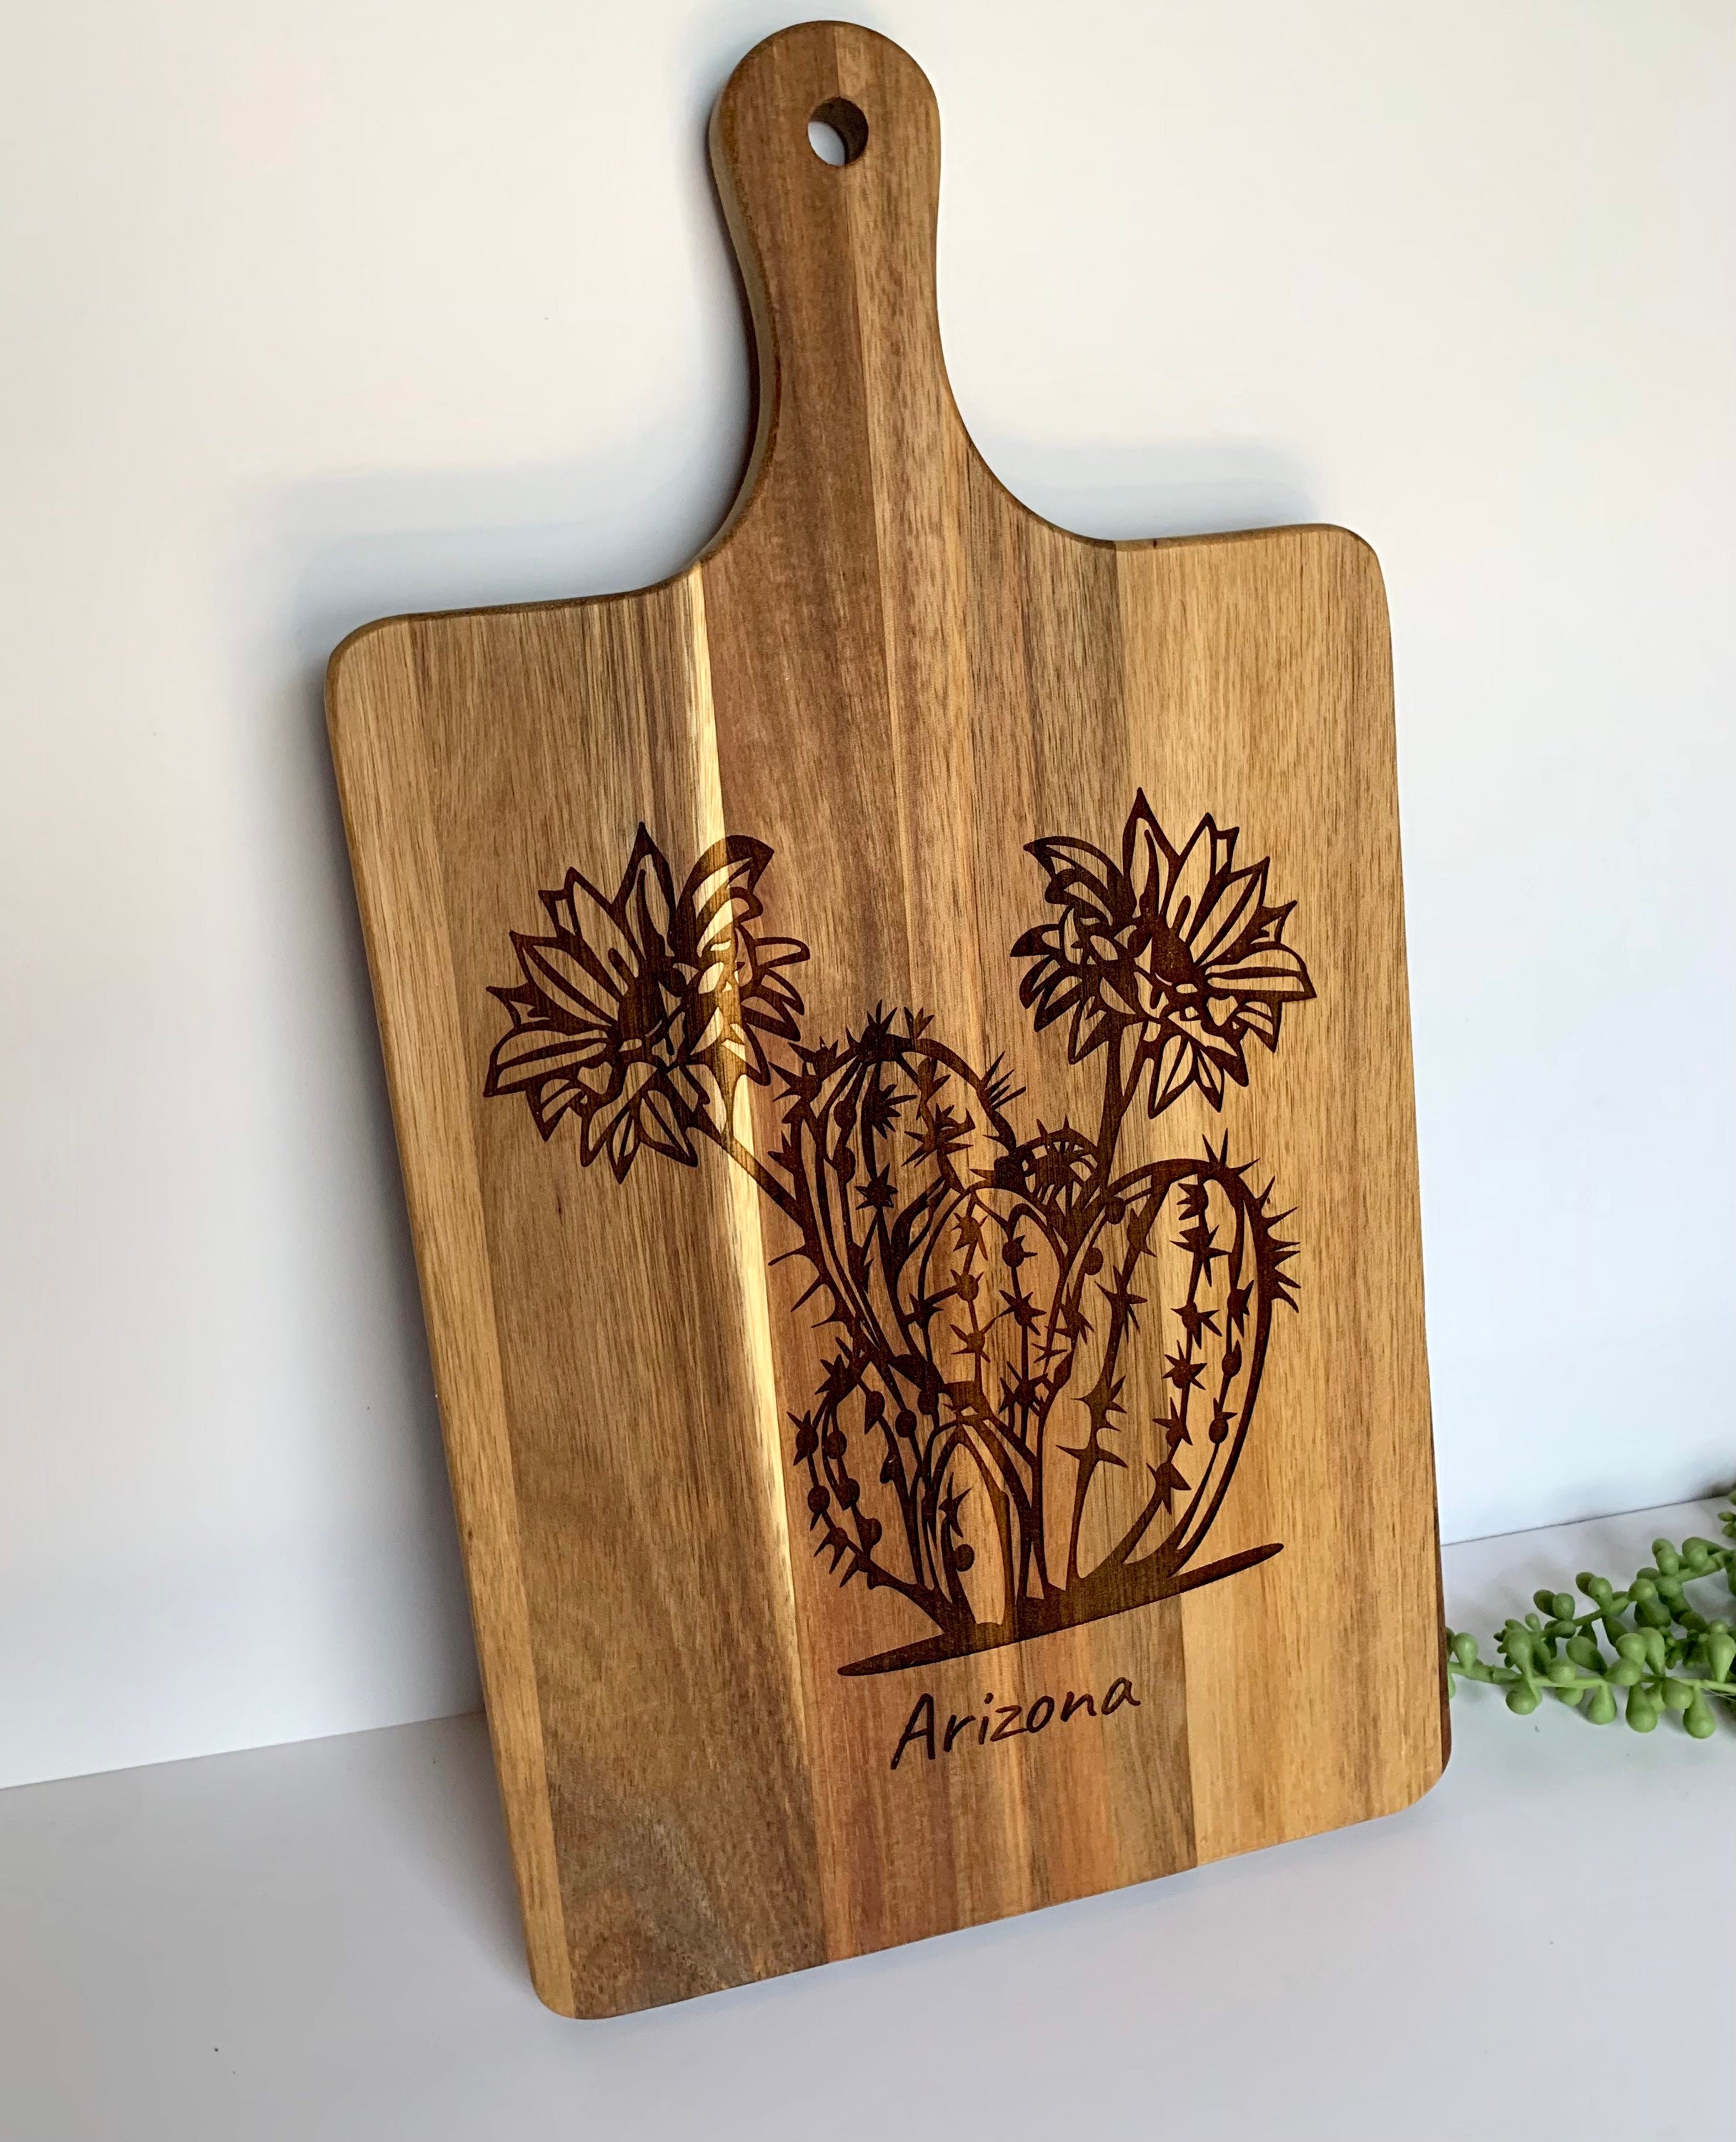 Custom Wood Burning Patterns: Cactus // Easy Pattern Template Design //  Pyrography Art // Instant Download PDF File // Cutting Board Gift -   Denmark